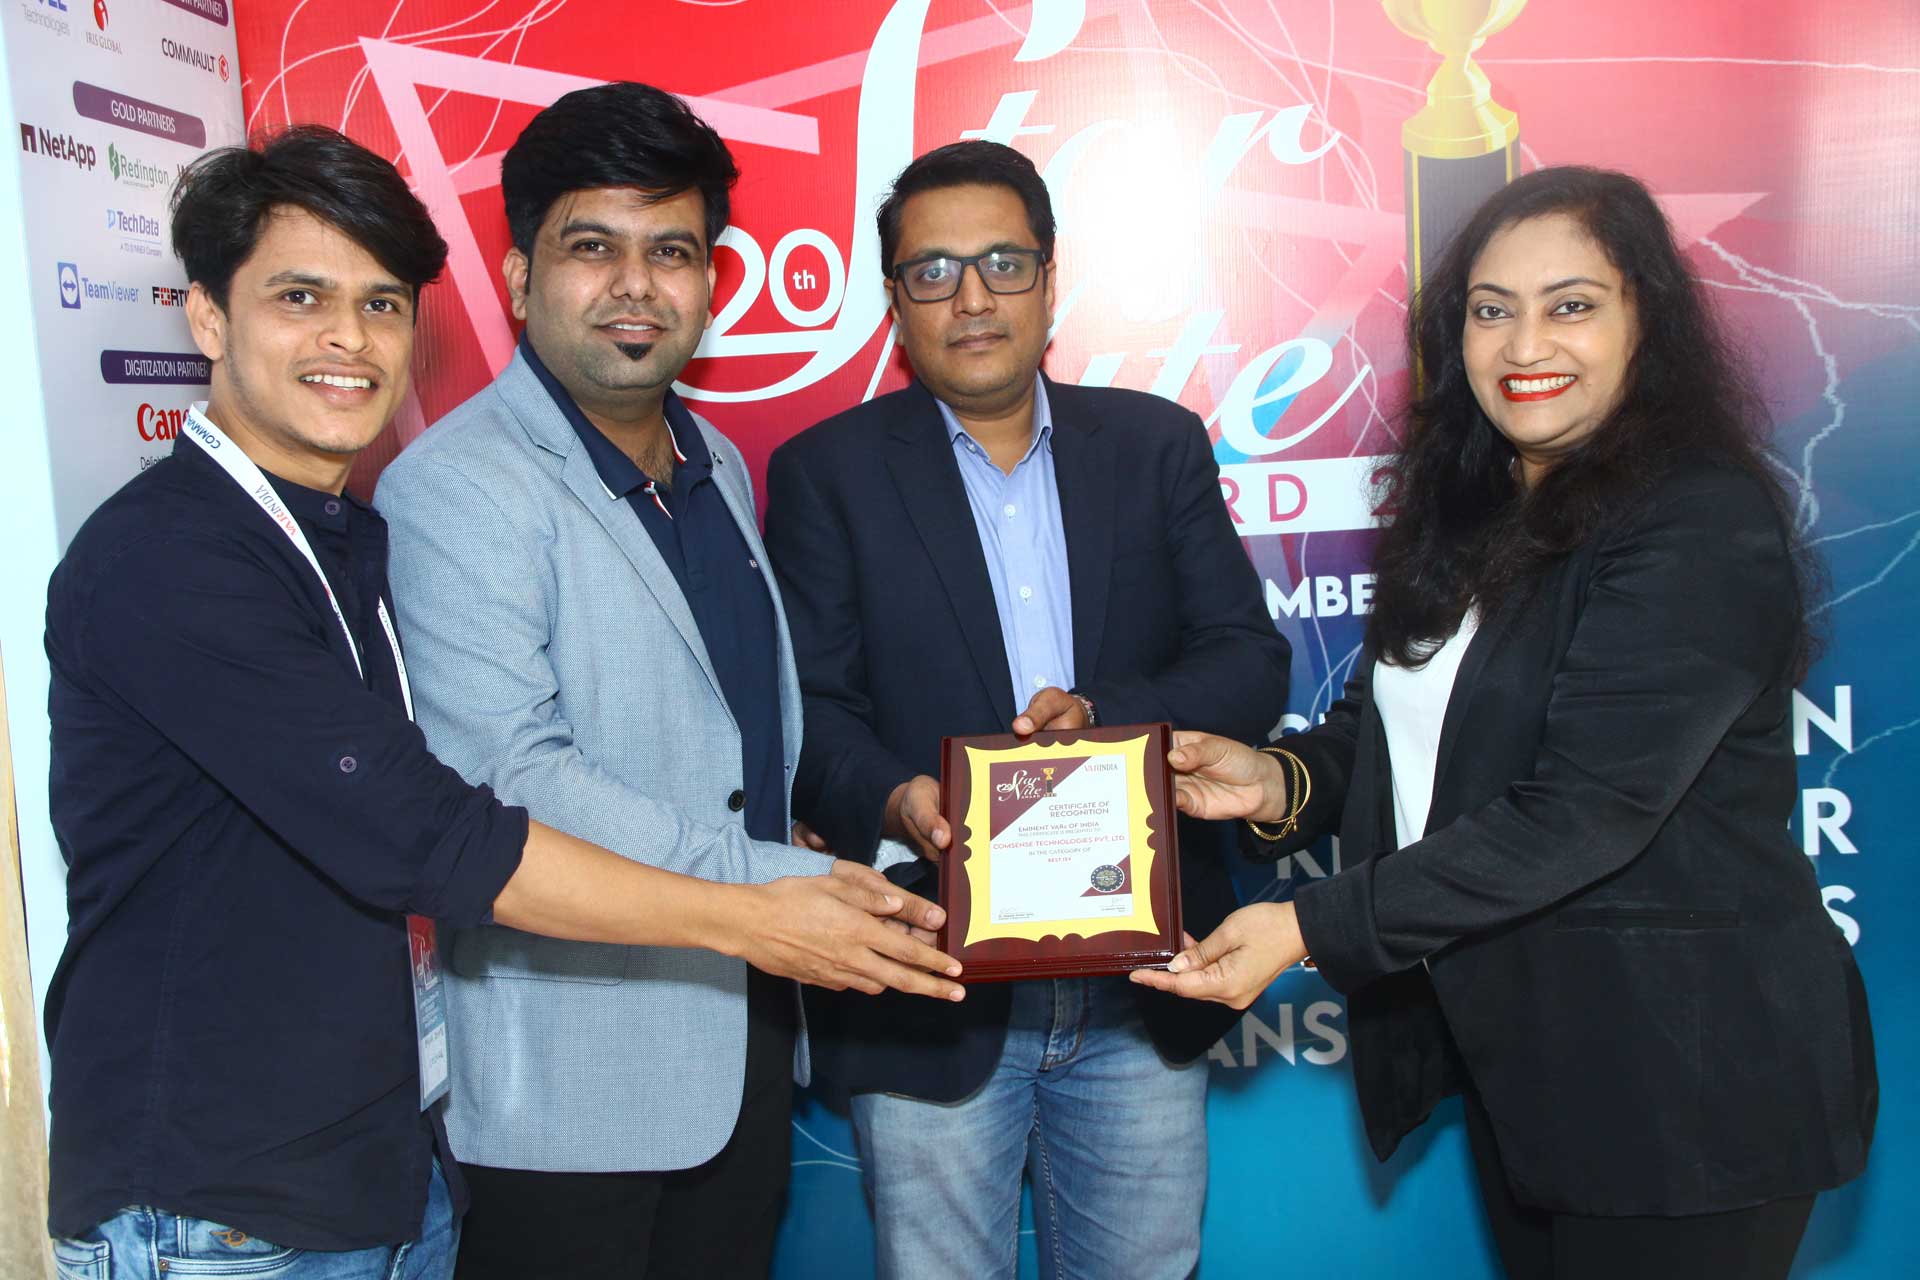 Best ISV Award goes to Comsense Technologies at 20th Star Nite Awards 2021